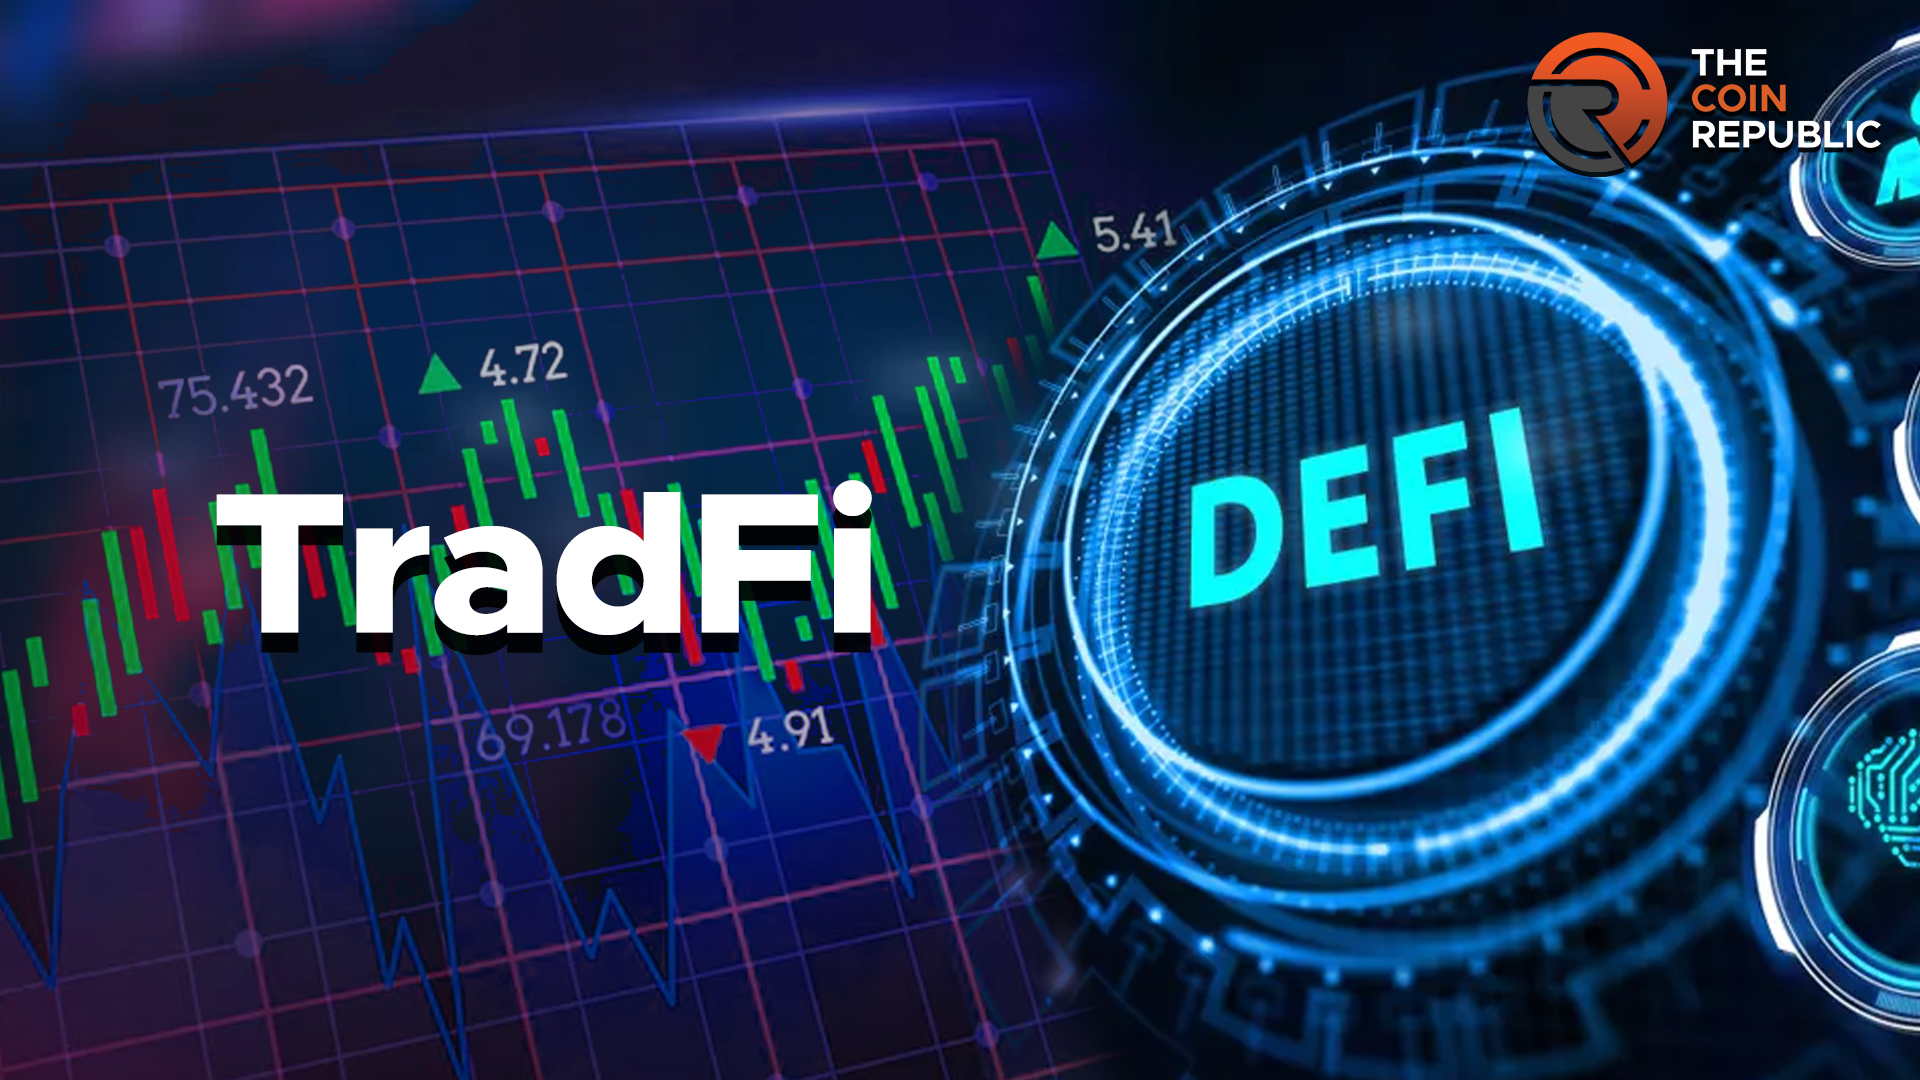 Roles of TradFi and DeFi In The Economy, Details On Their Integration